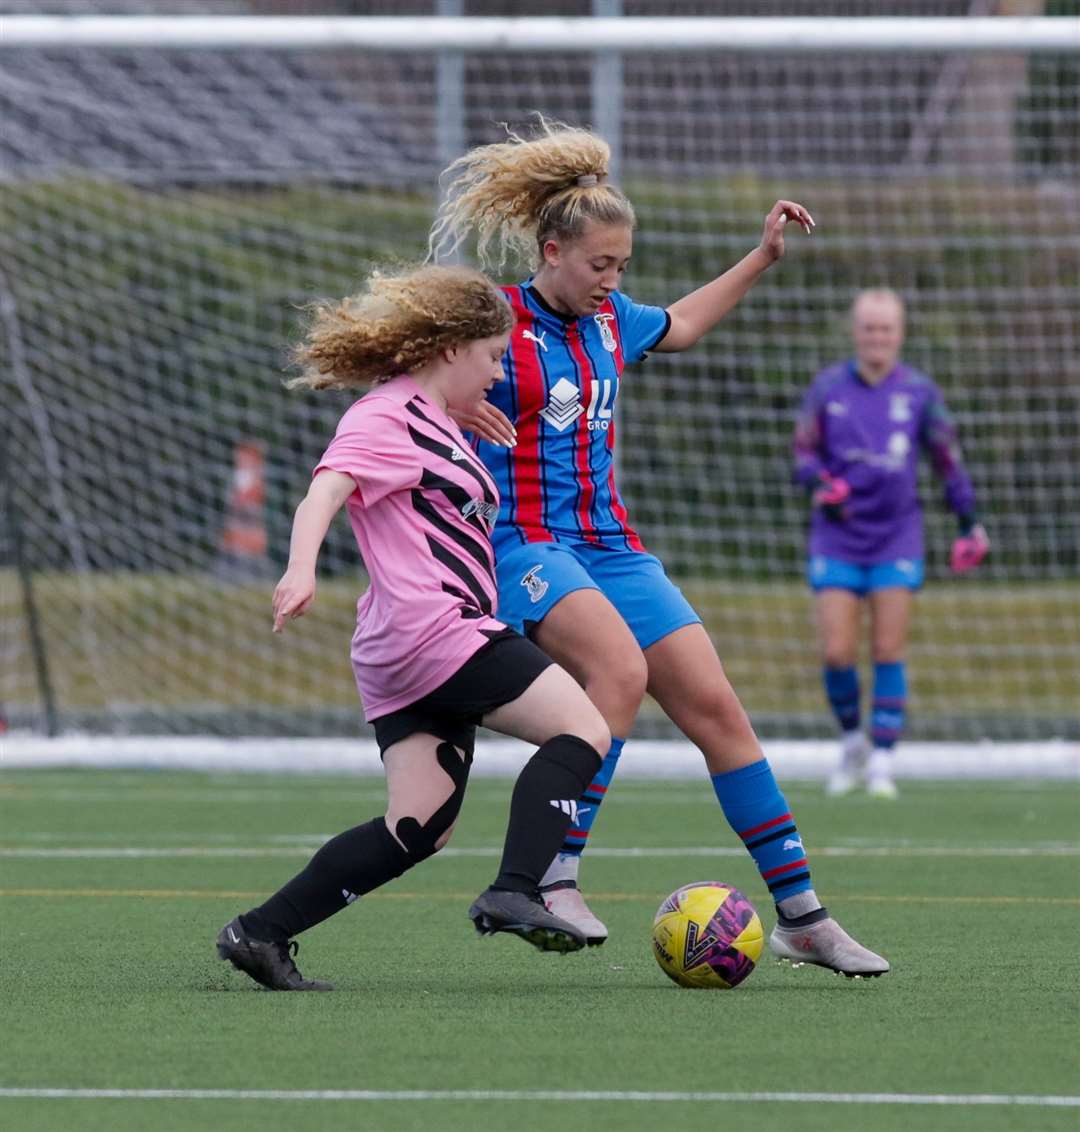 photo by Donald Cameron / Sportpix / Sipa USA) SCOTTISH WOMEN'S FOOTBALL IMAGES FREE FIRST USE IN UK ONLY